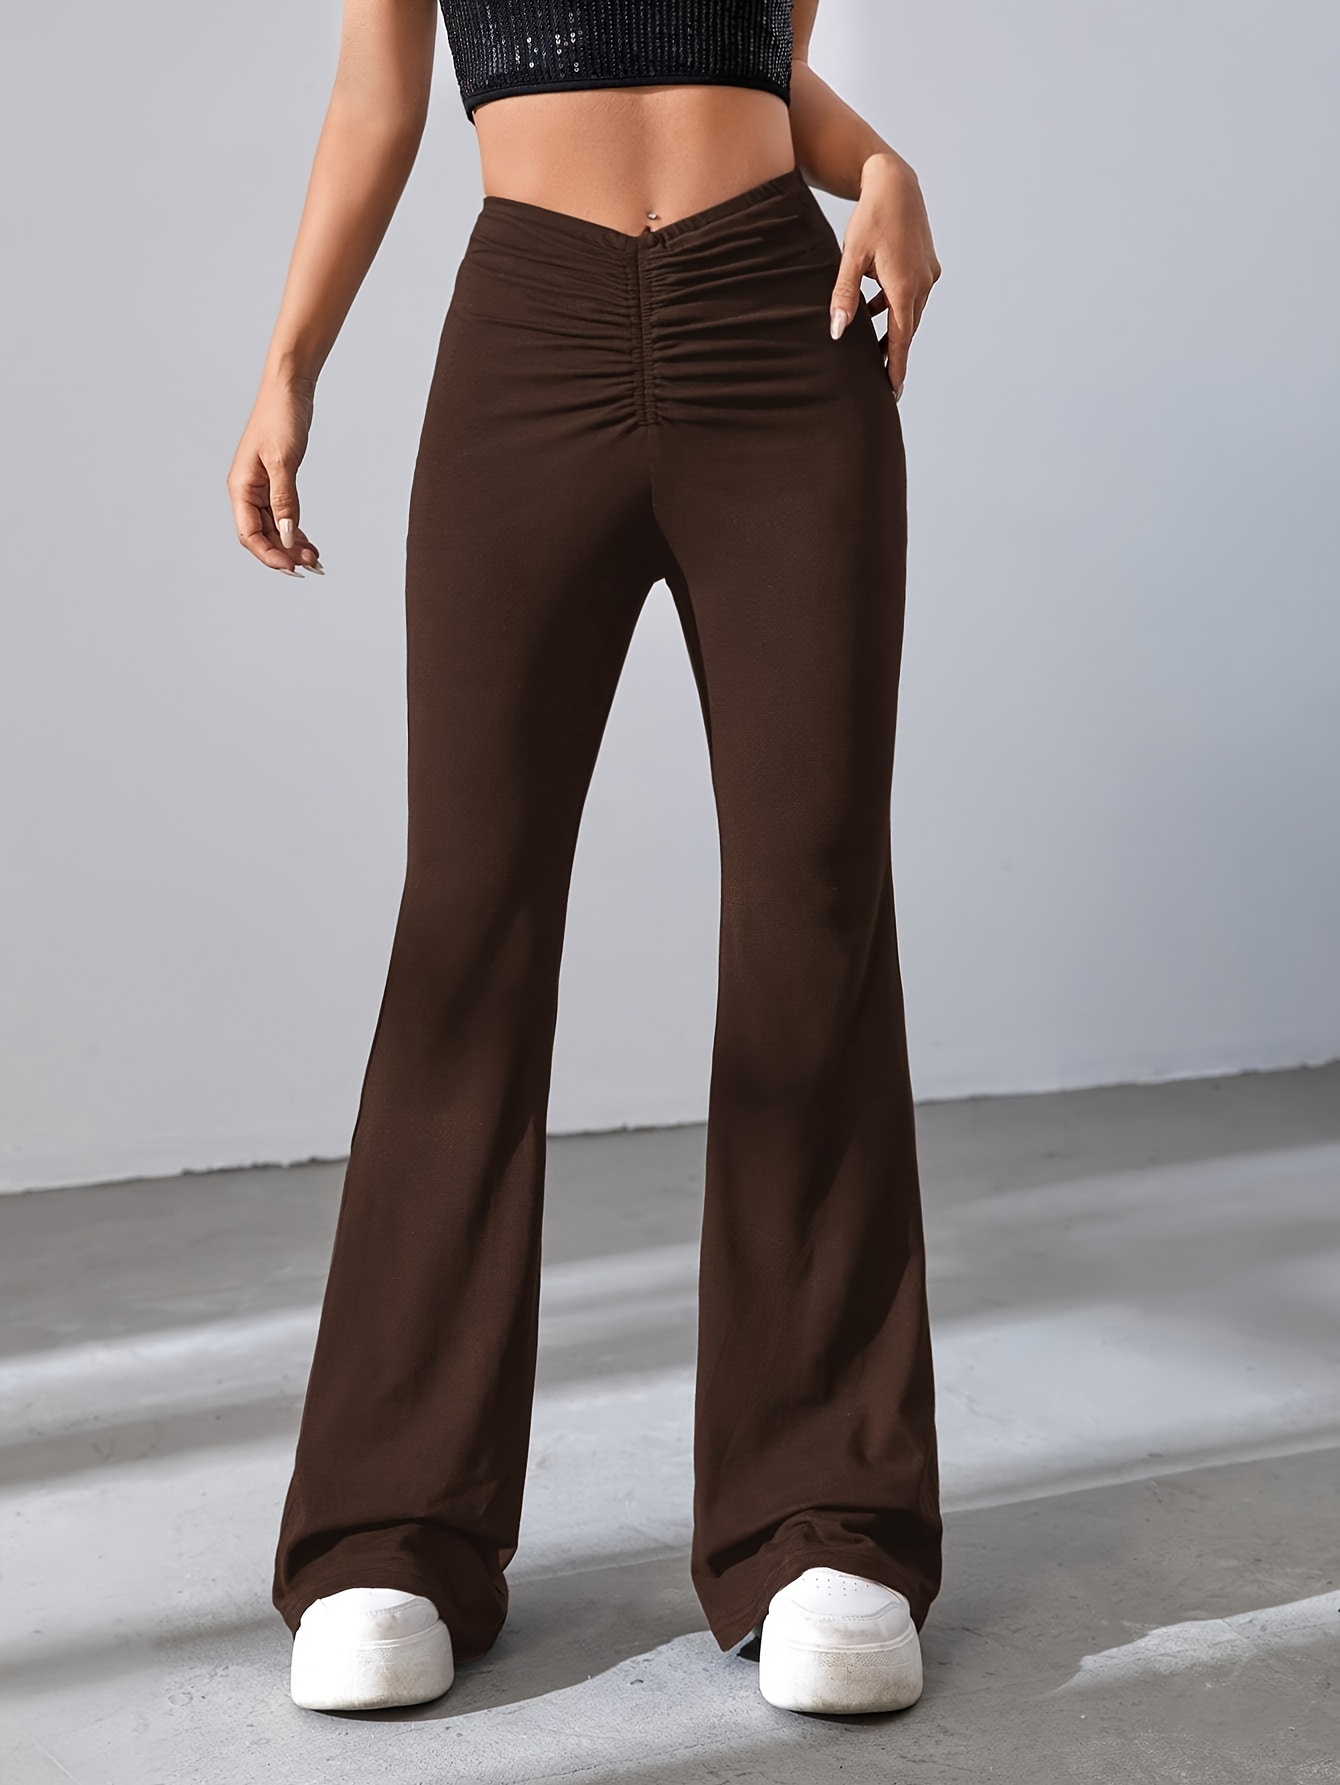  Solid Color Wide Leg Loose Fitting Flare Bell Bottom Athletic  Casual Boot Cut Bootleg Workout Pants Women Sweatpants : Clothing, Shoes &  Jewelry